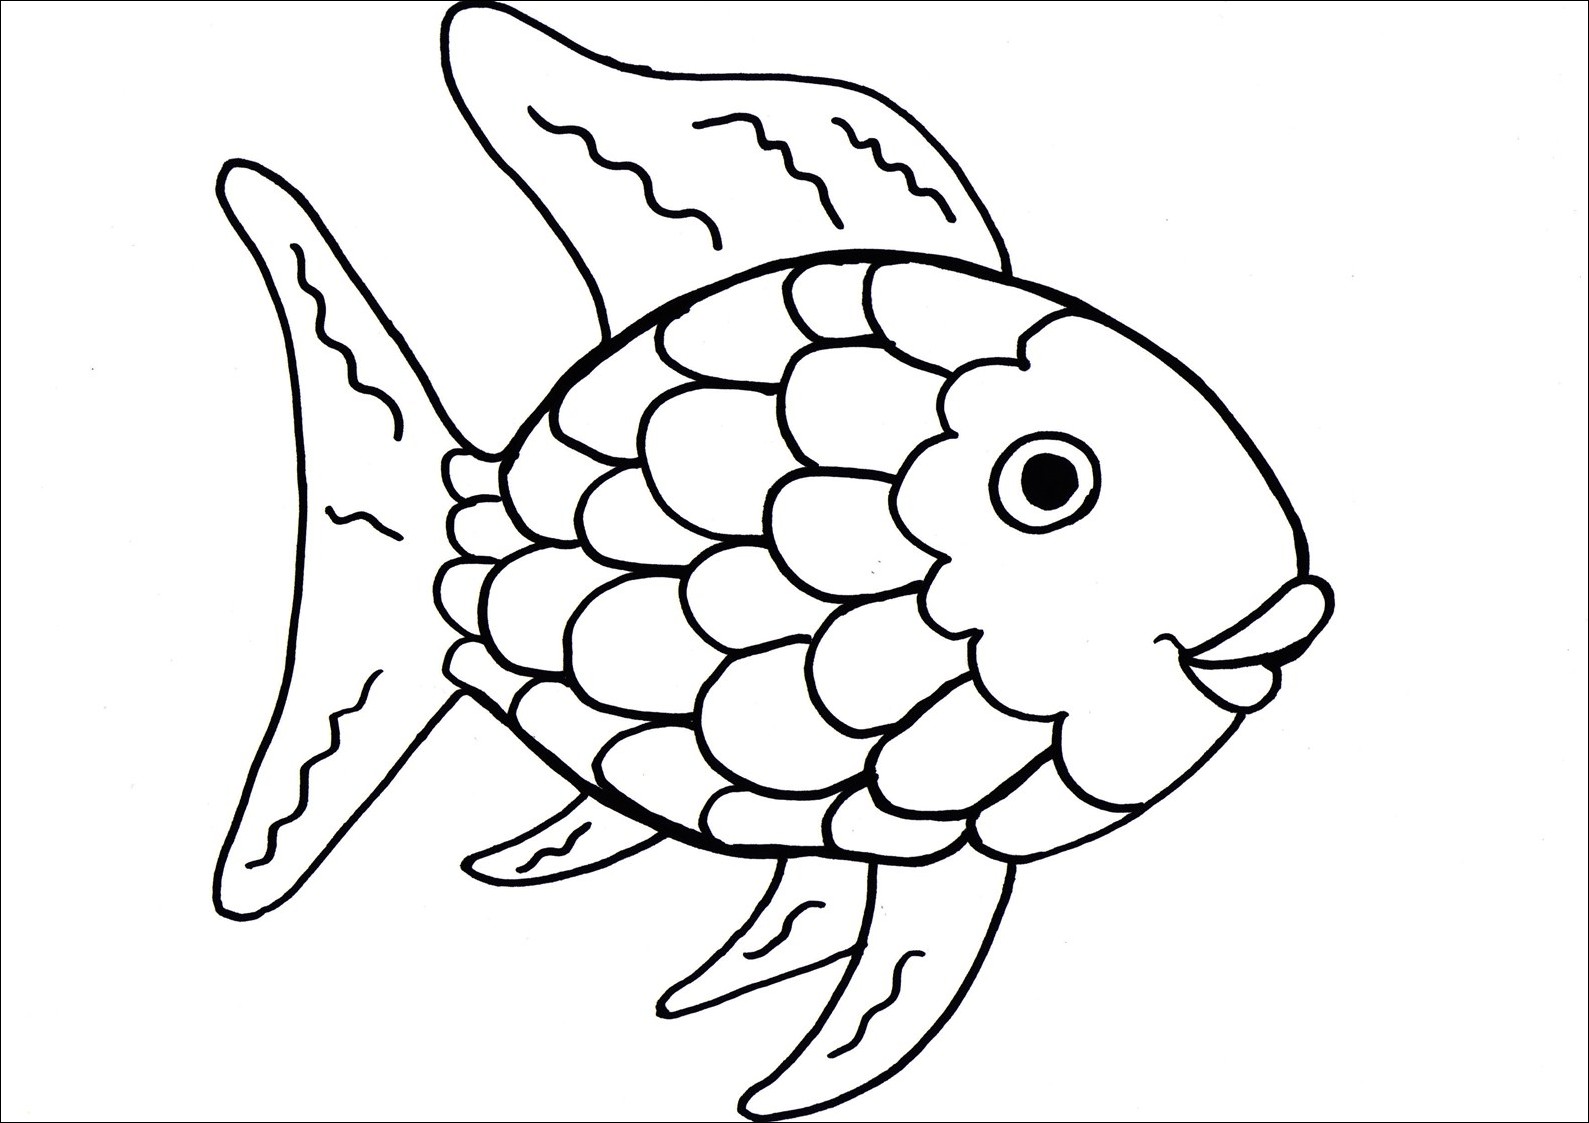 Displaying Printable Picture Of Rainbow Fish | picturespider.com